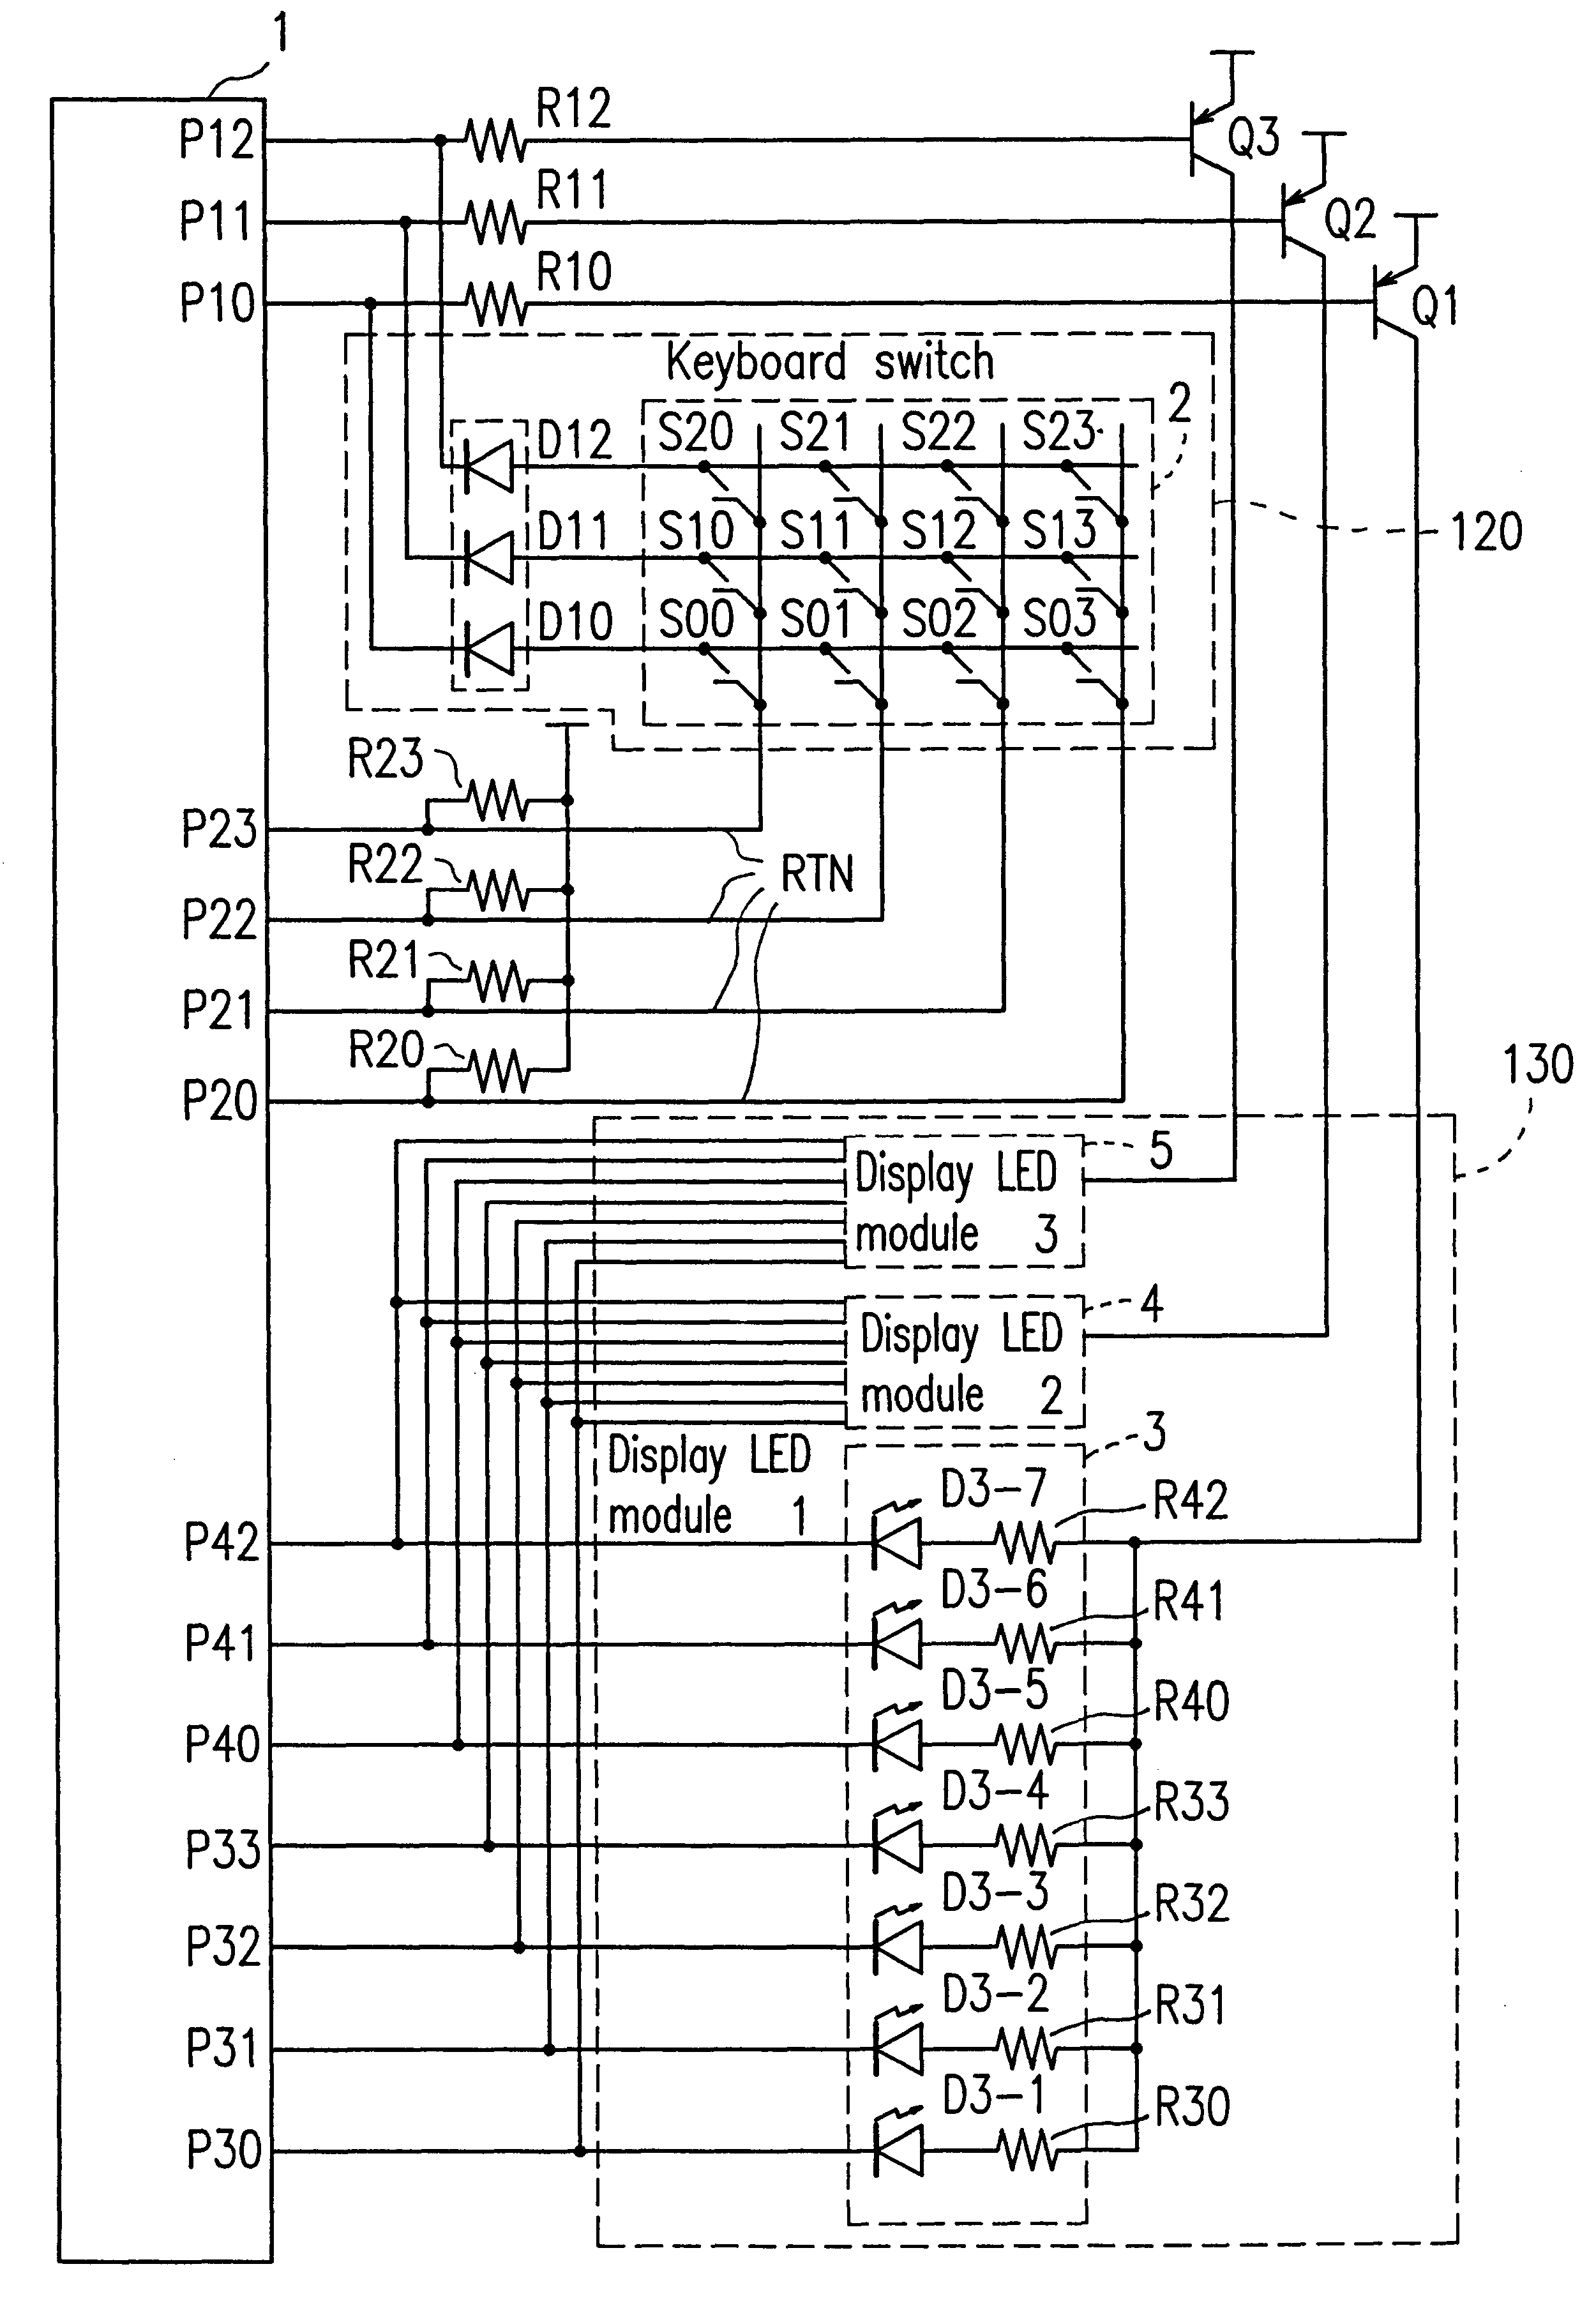 One-chip microcomputer system